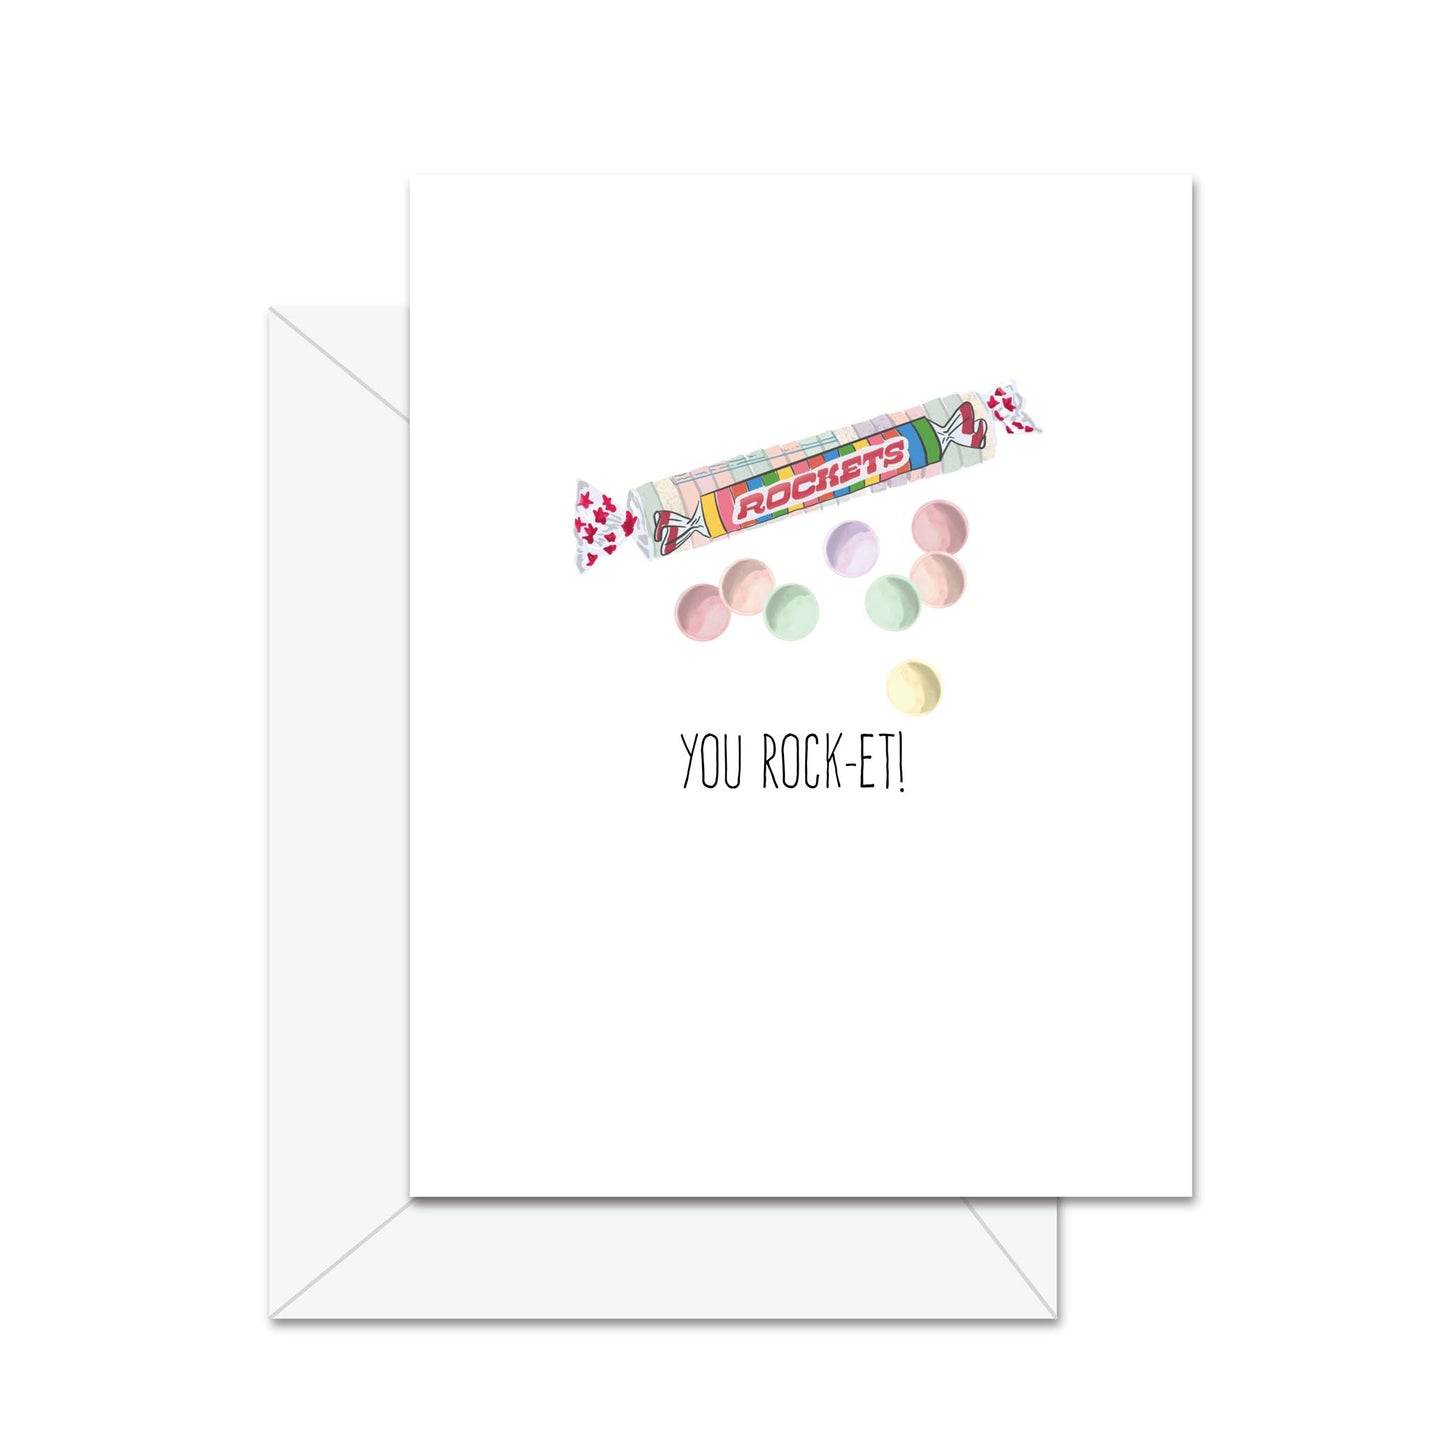 You Rock-et - Greeting Card